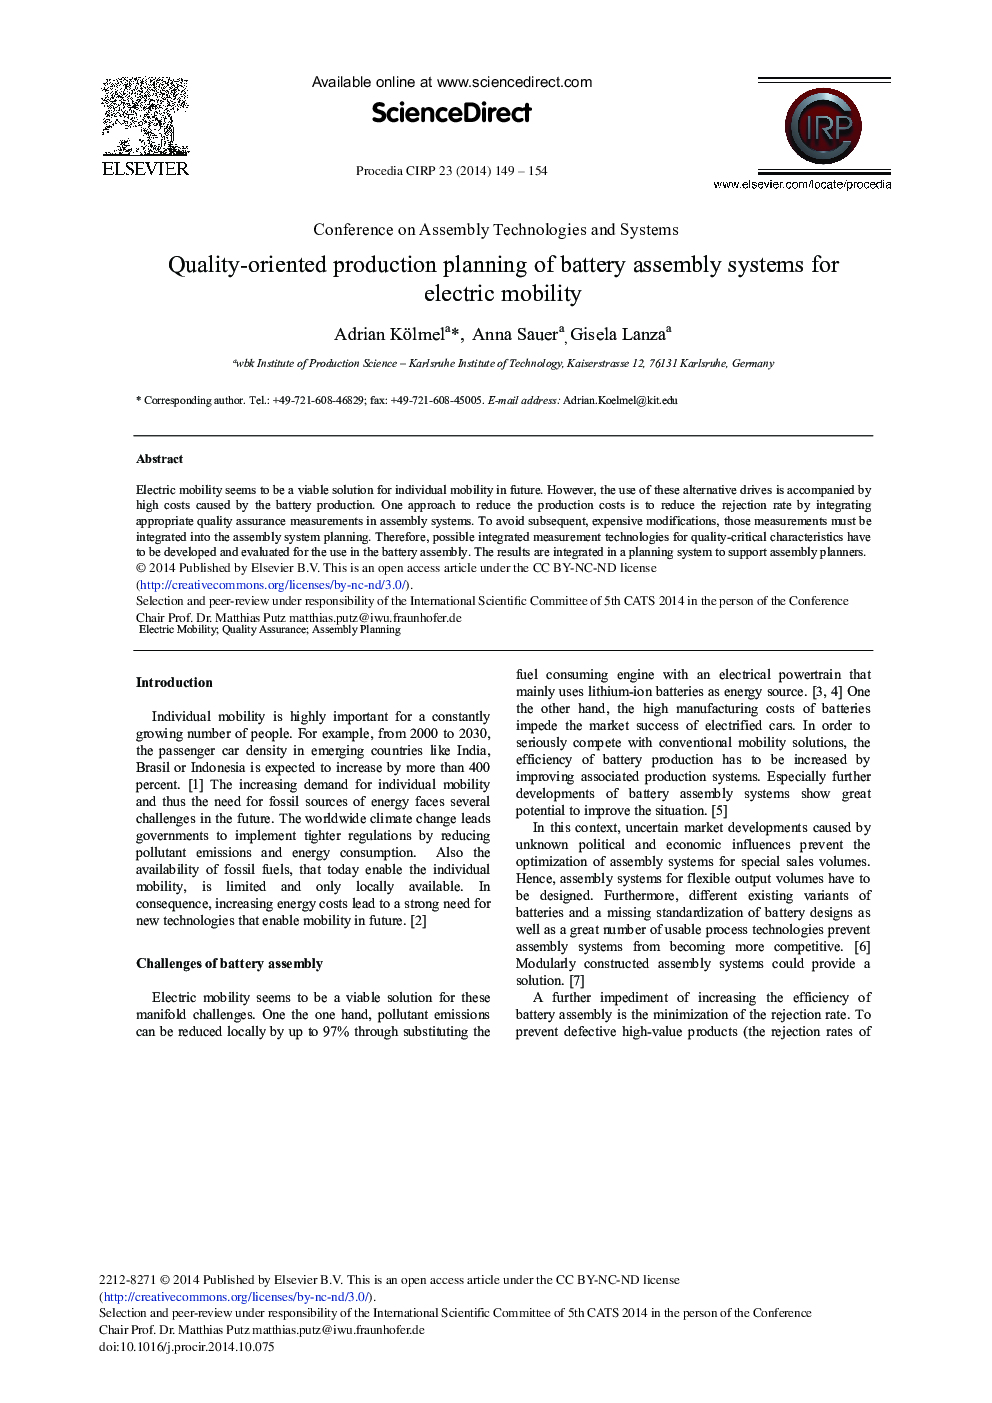 Quality-oriented Production Planning of Battery Assembly Systems for Electric Mobility